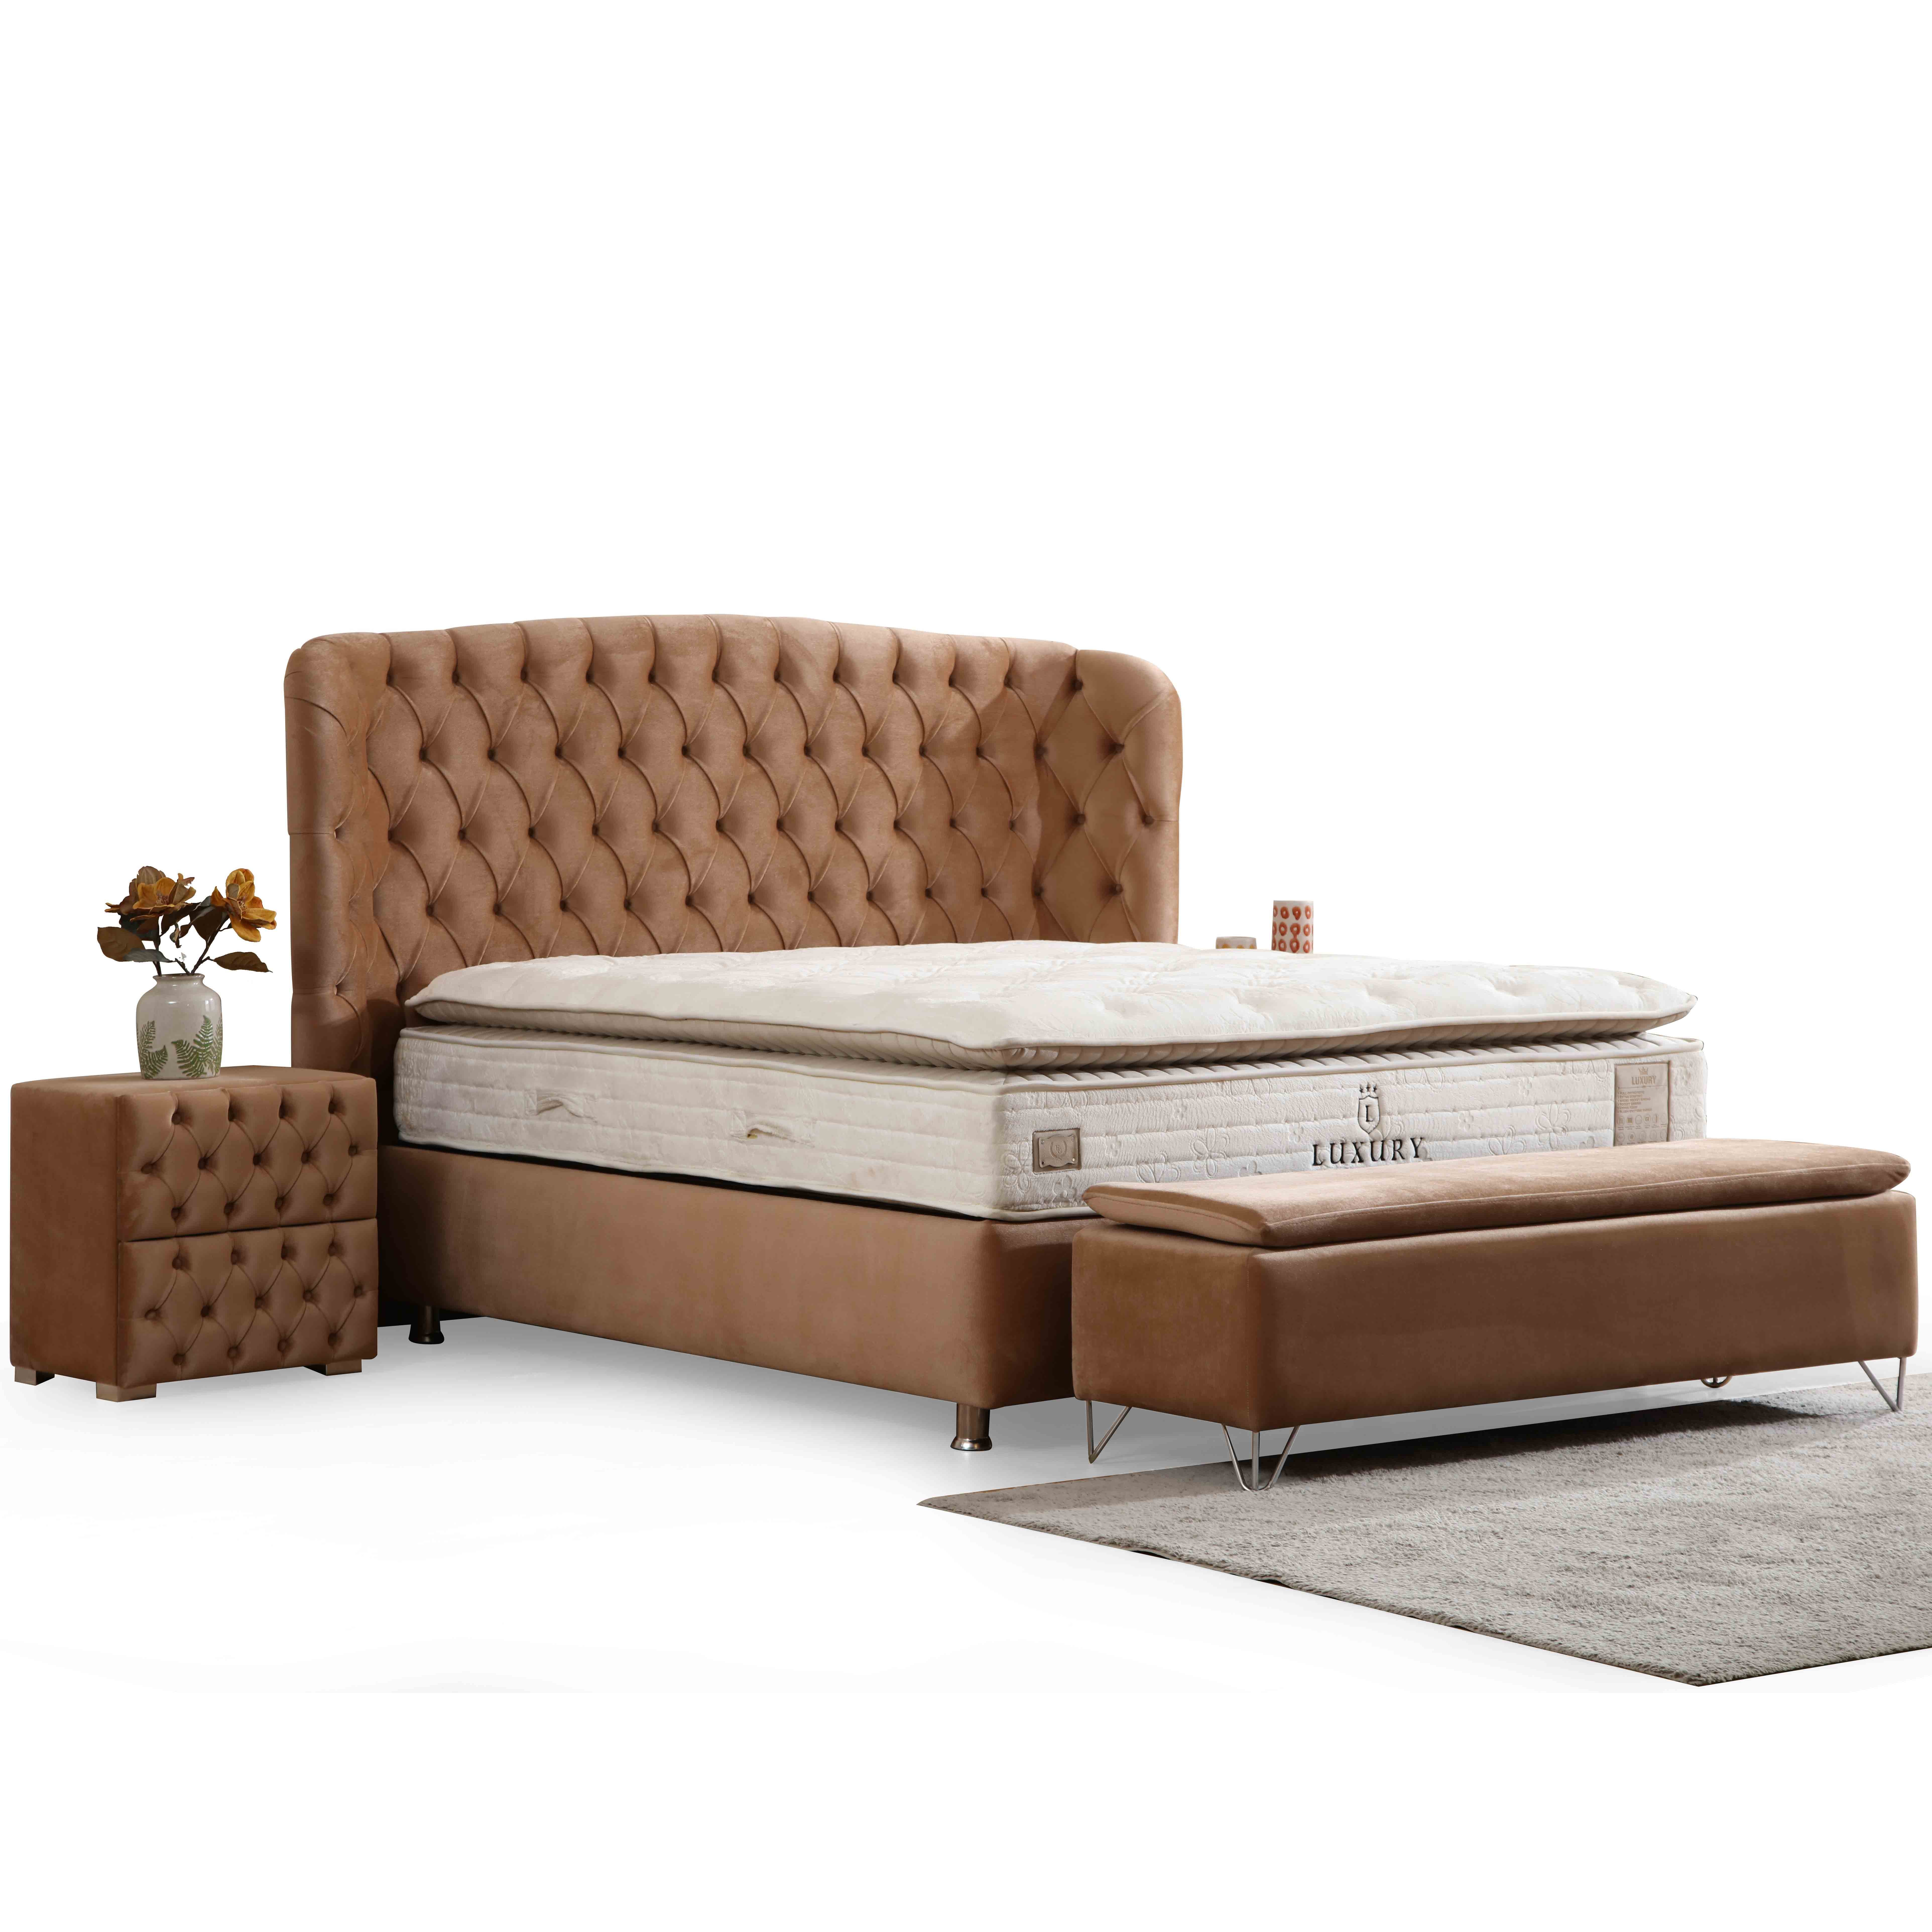 Riva Bed With Storage 120x200 cm